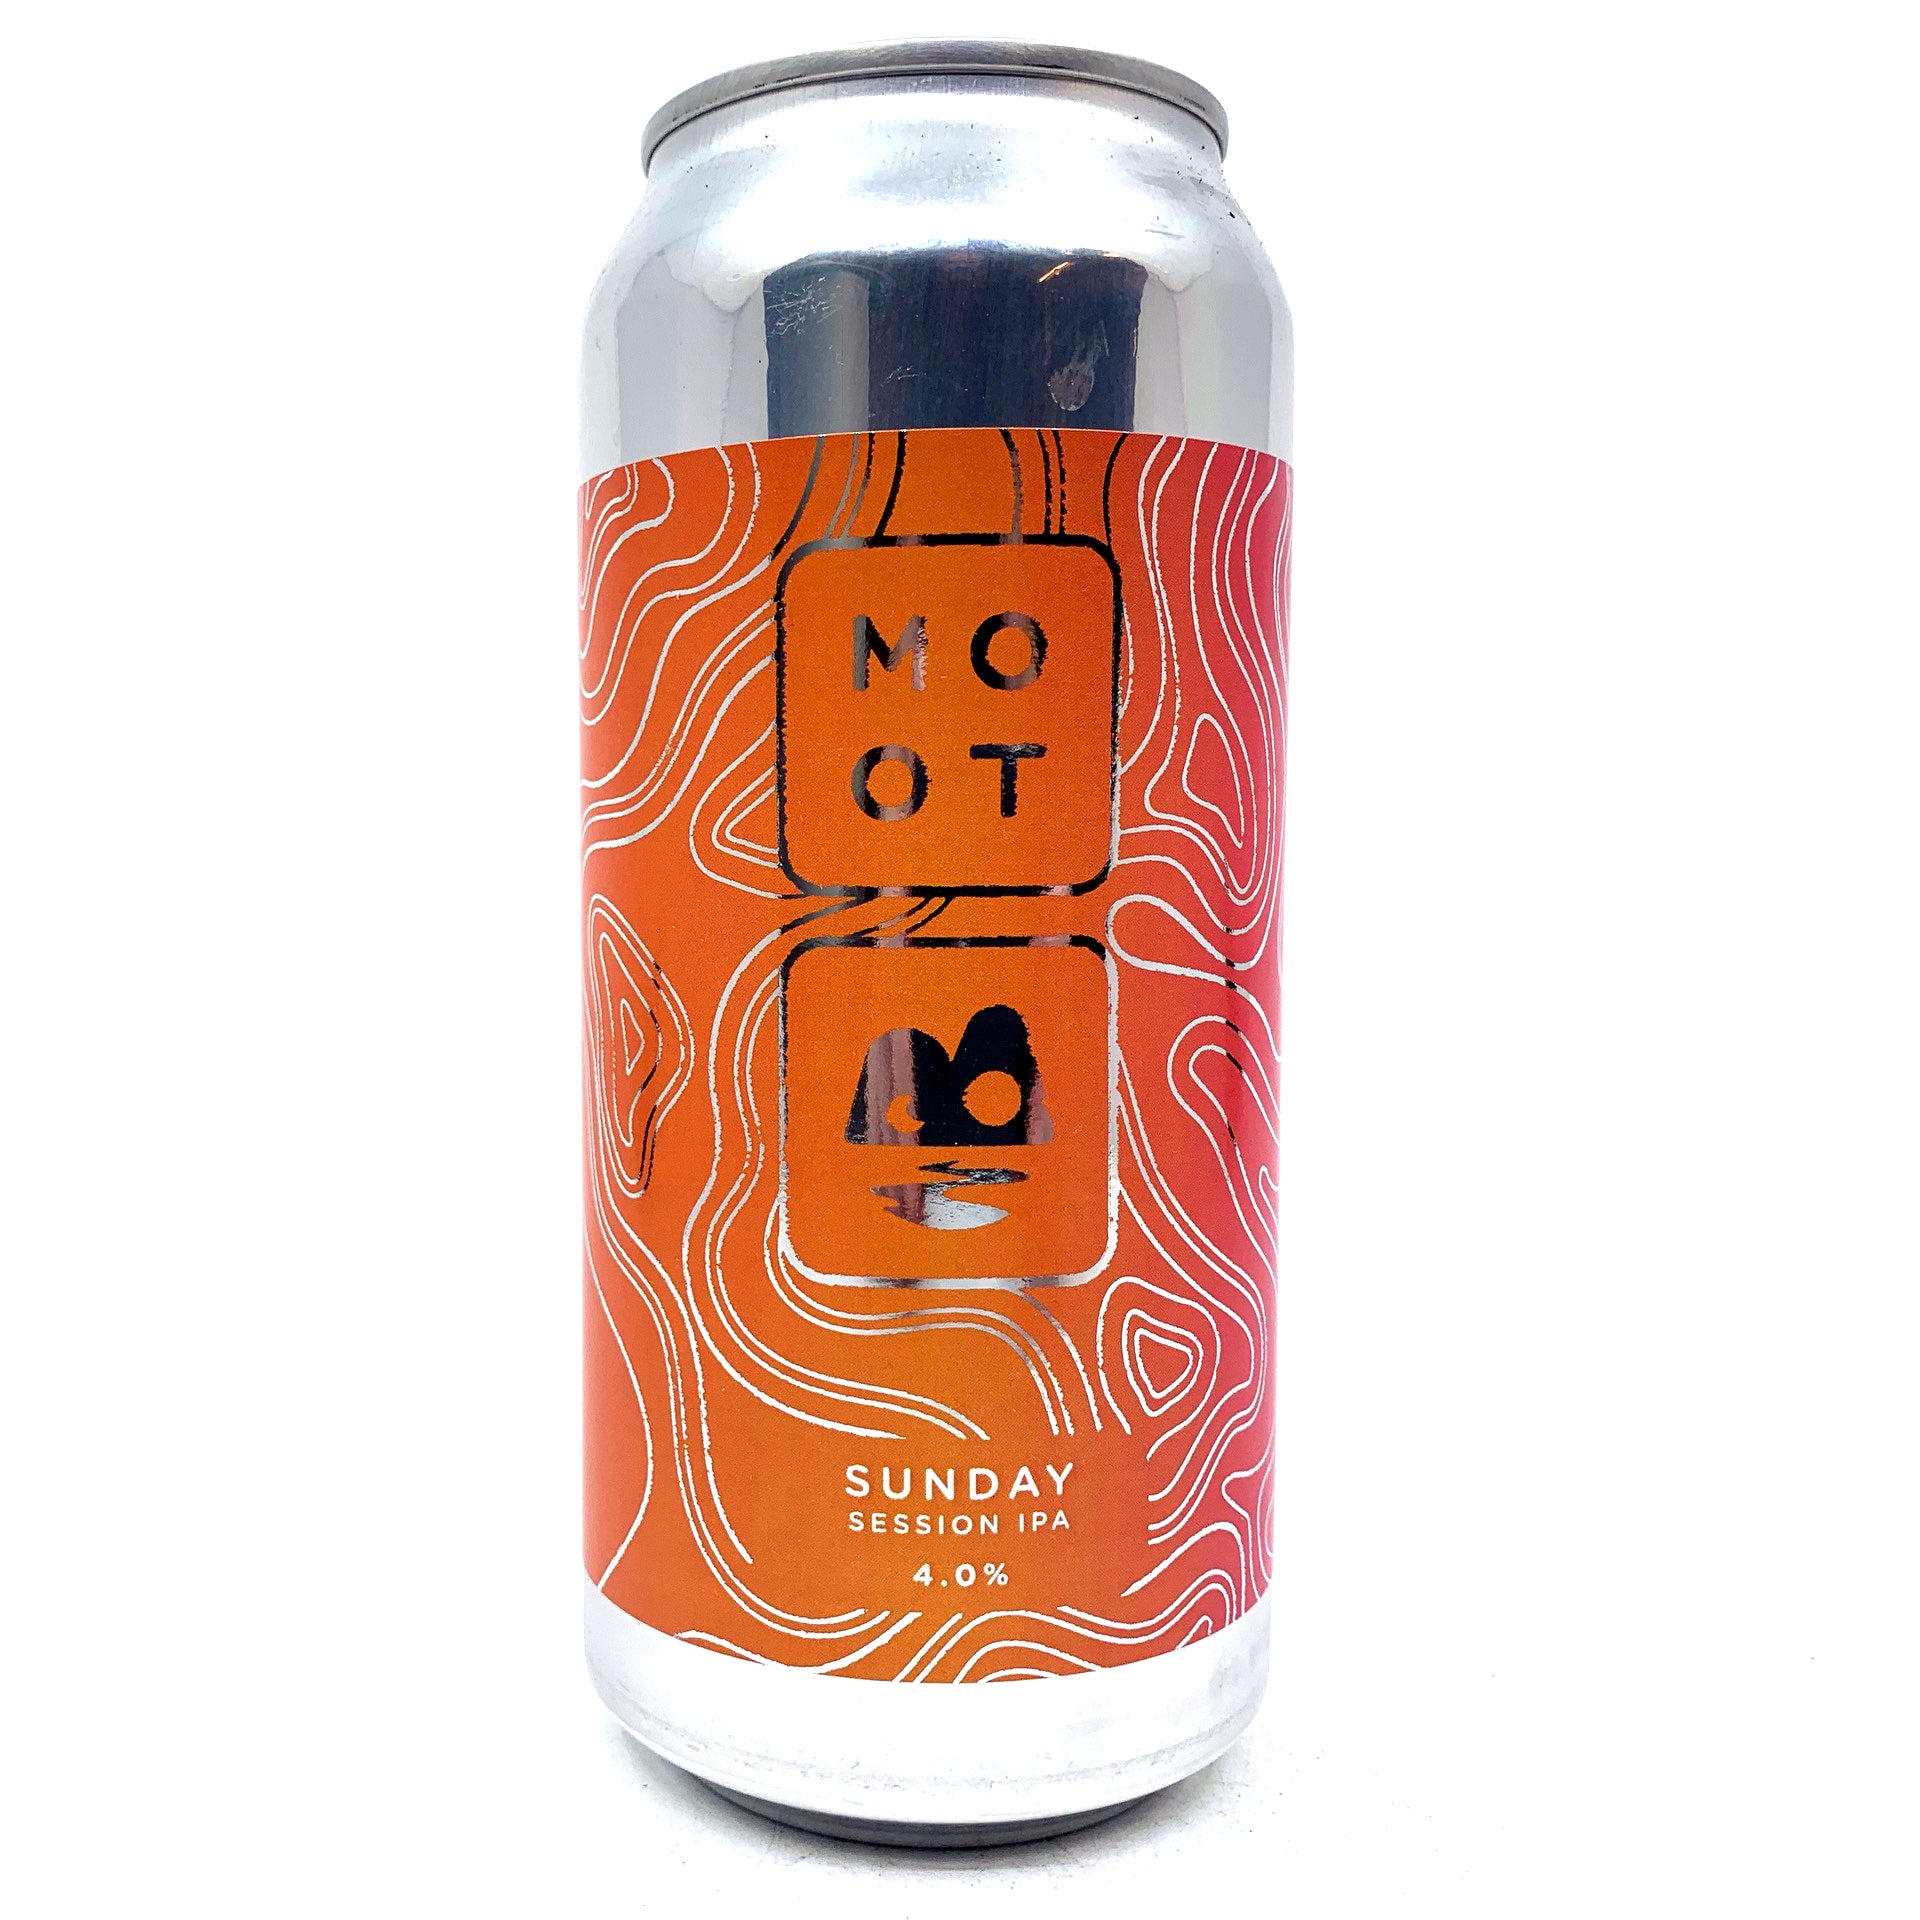 Moot Brew Co Sunday Session IPA 4% (440ml can)-Hop Burns & Black